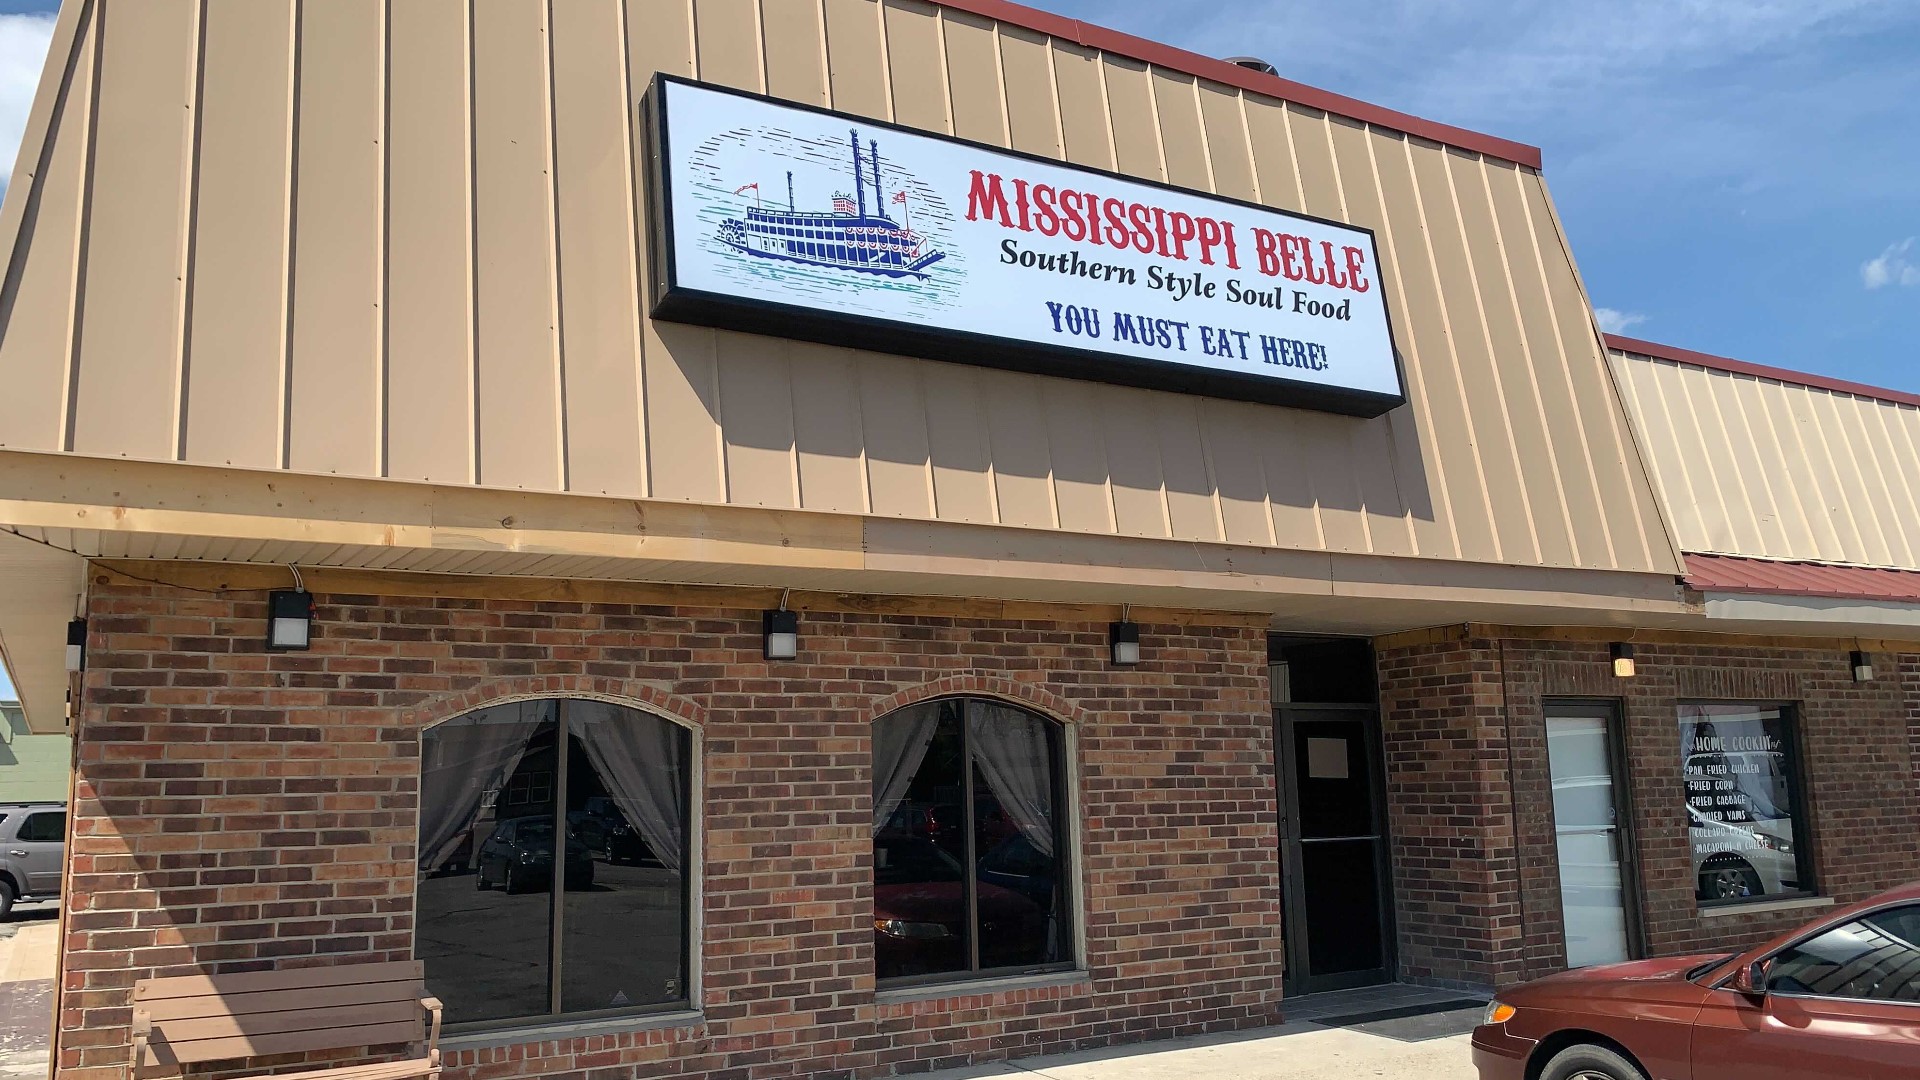 The north Indianapolis restaurant known for its southern-style soul food was gutted by fire in October 2019.